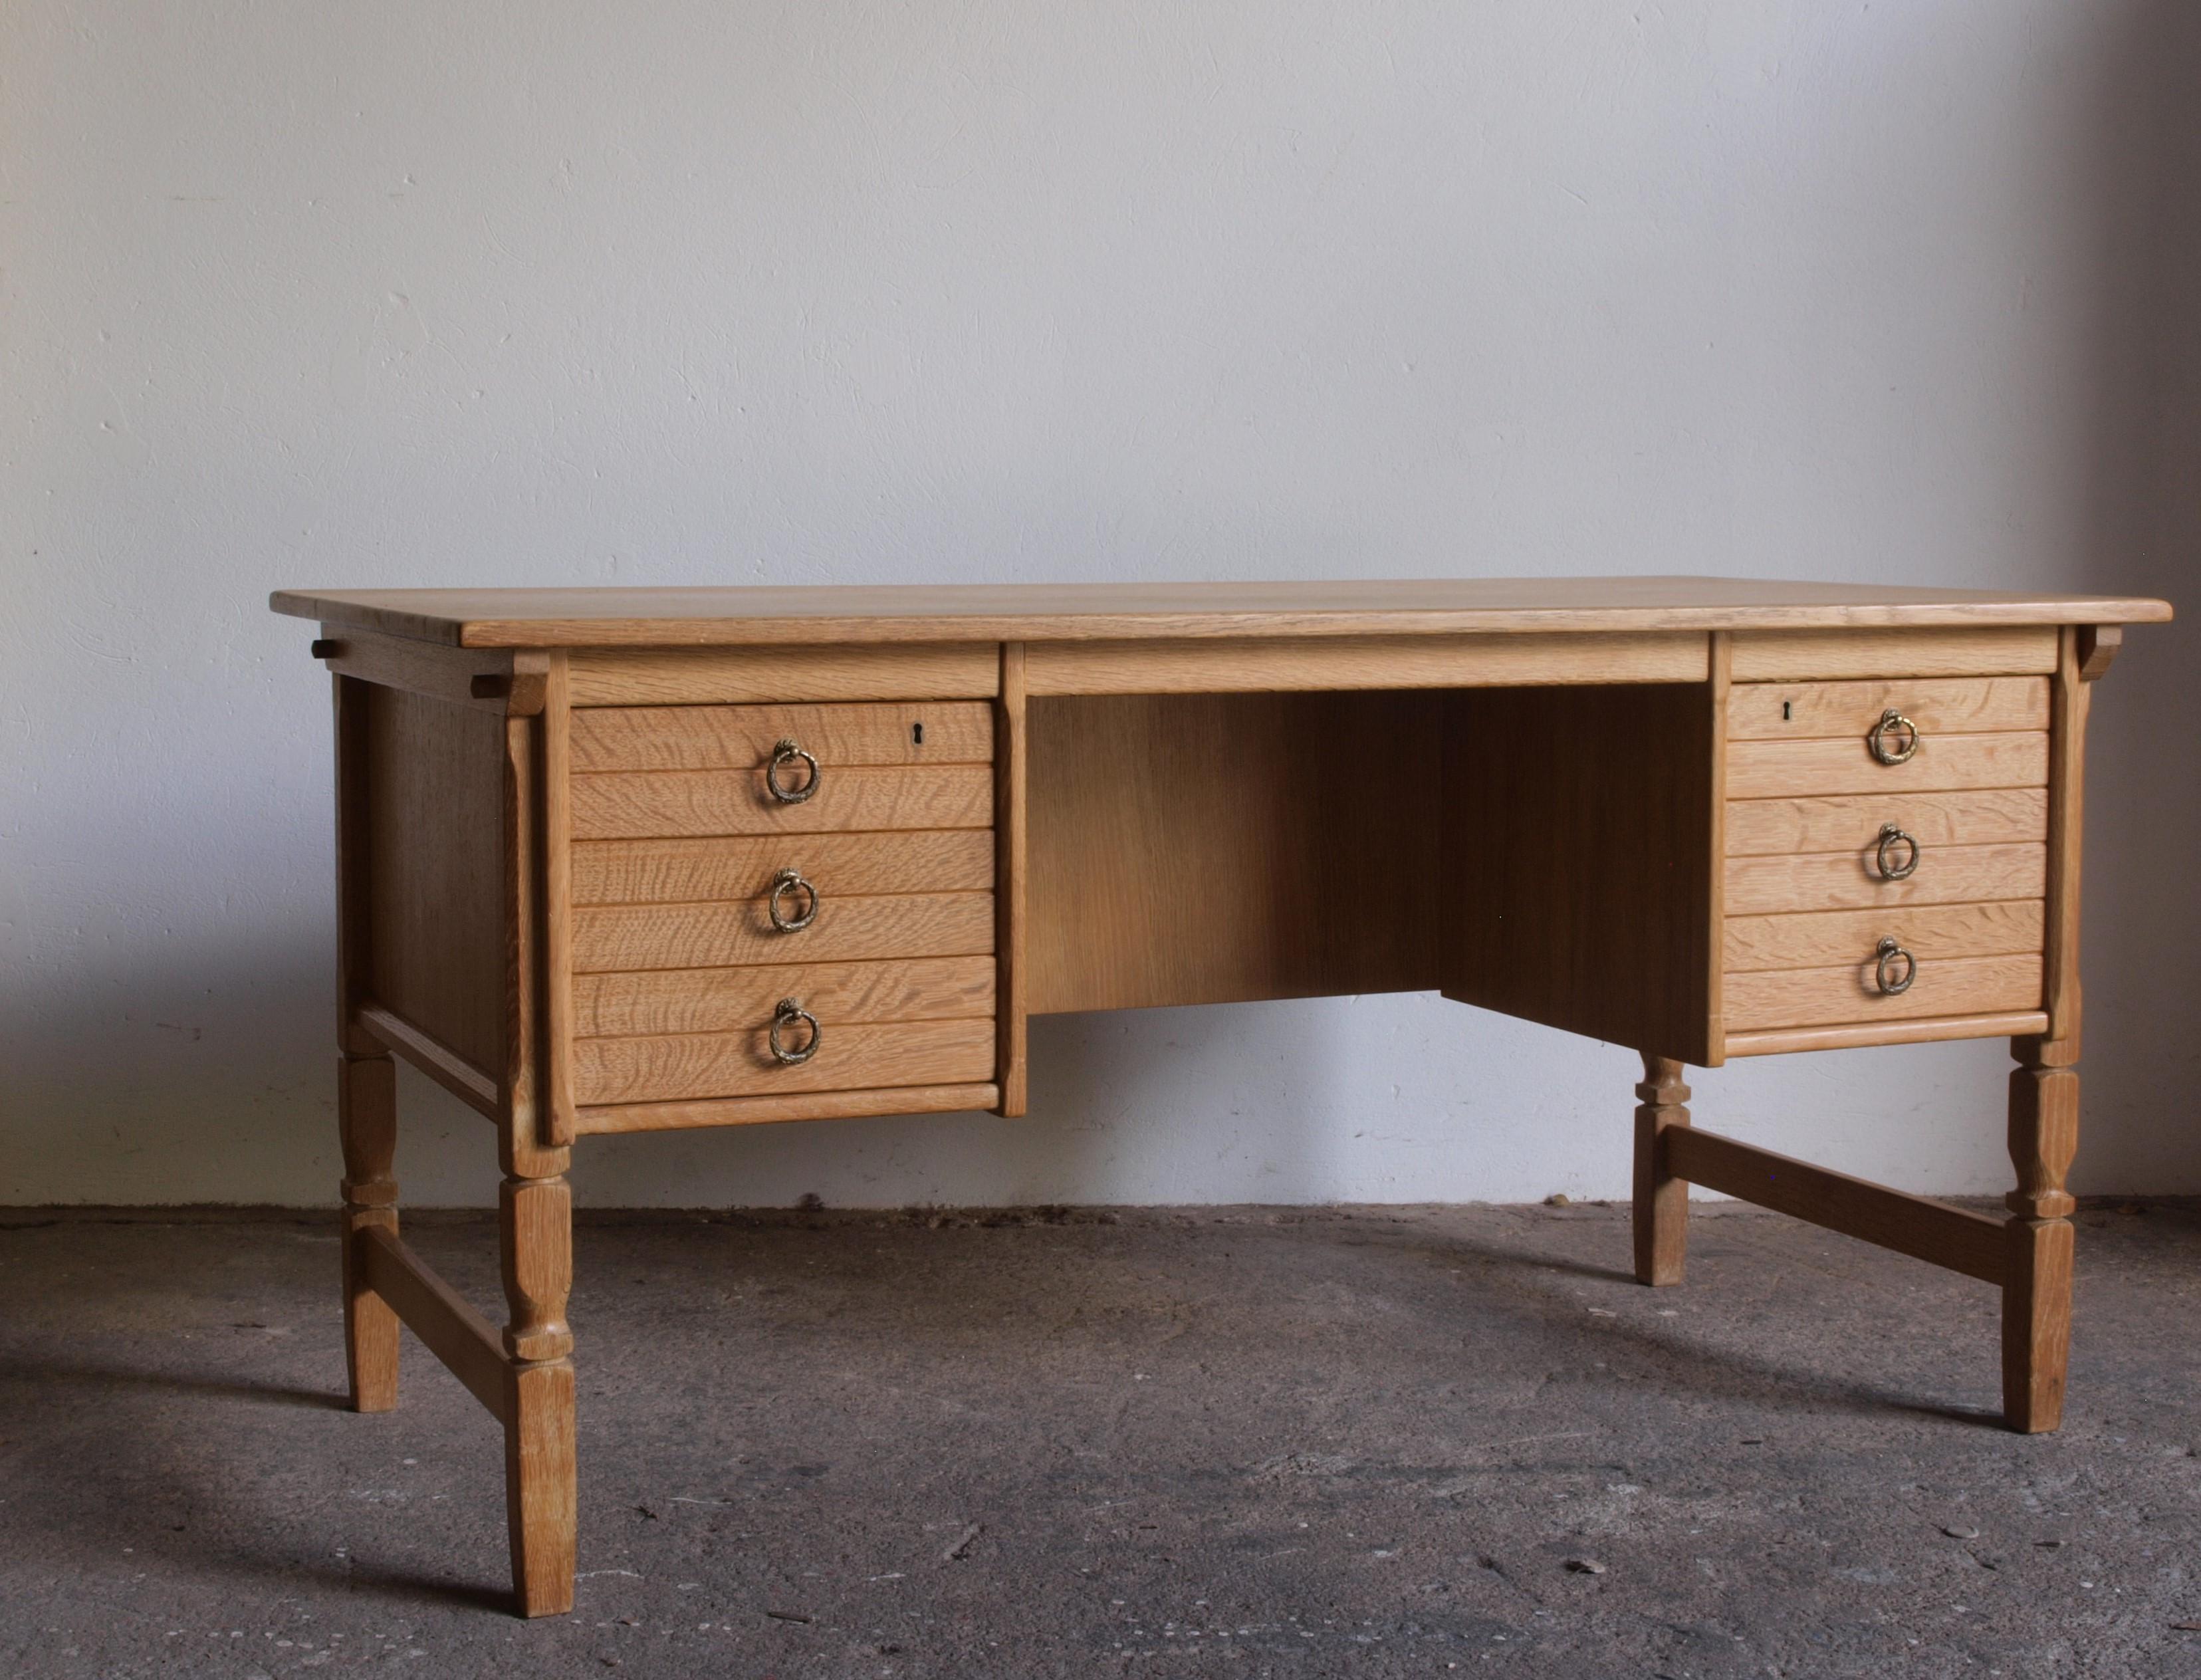 Solid oak writing desk complete with drawers, by and documented to the Danish furniture designer Henning Henry Kjærnulf, a compelling piece. This creation harmoniously blends bold Baroque elements with the finesse of Mid-Century Modernism, resulting